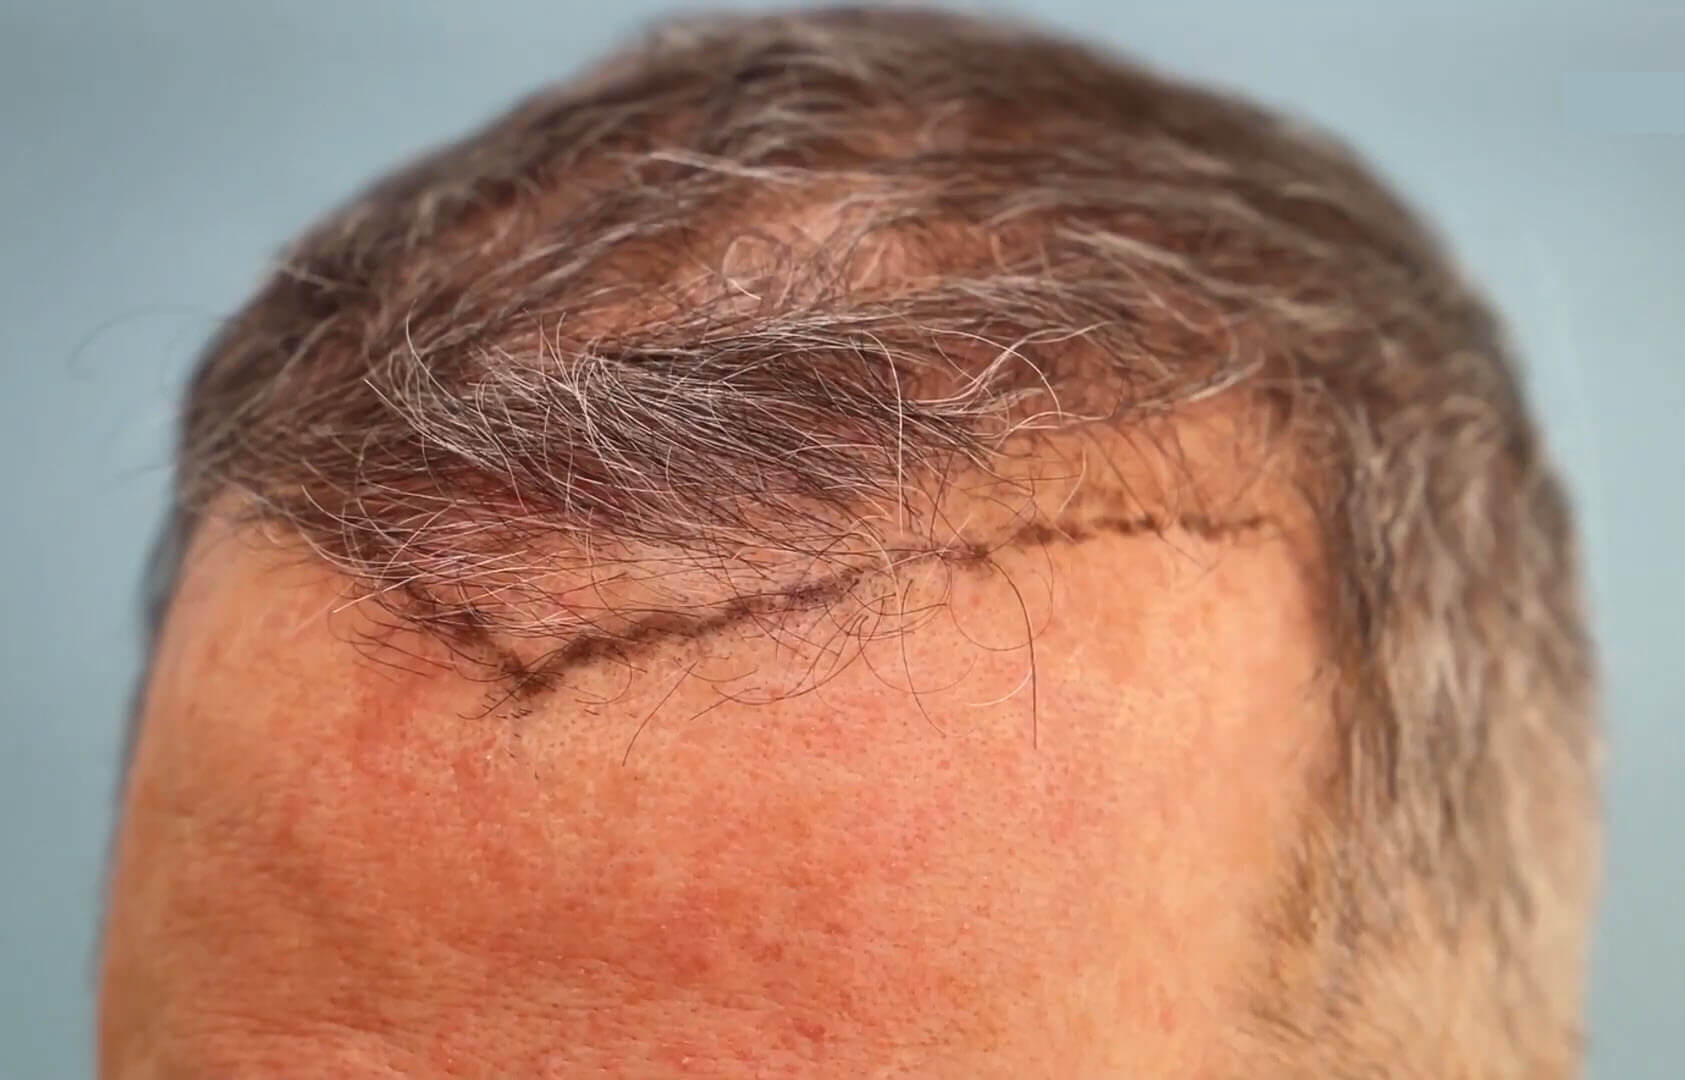 Norwood Grade 3V Baldness results  3330 grafts 8months at Eugenix Hair  Sciences India on Vimeo